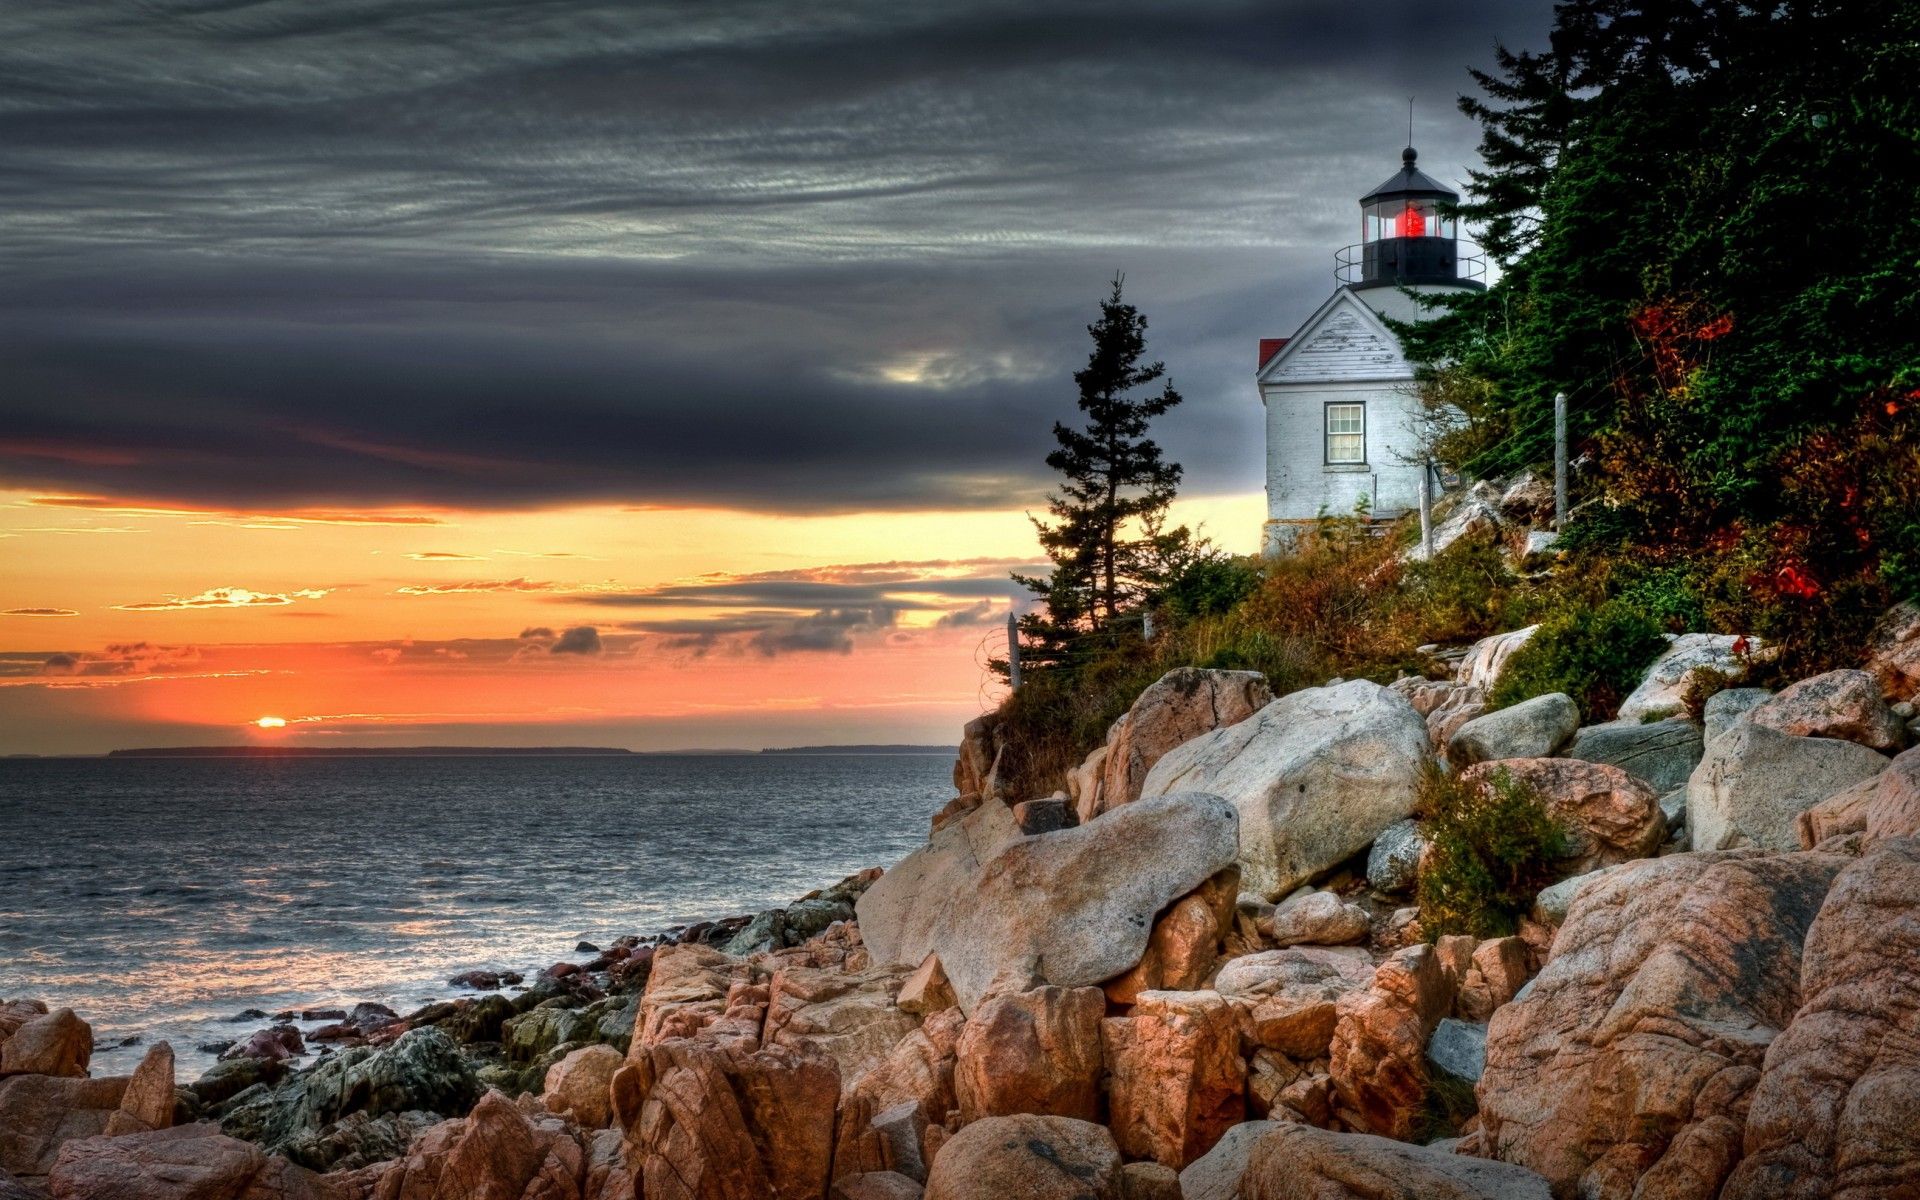 Sunrise At Lighthouse Wallpapers